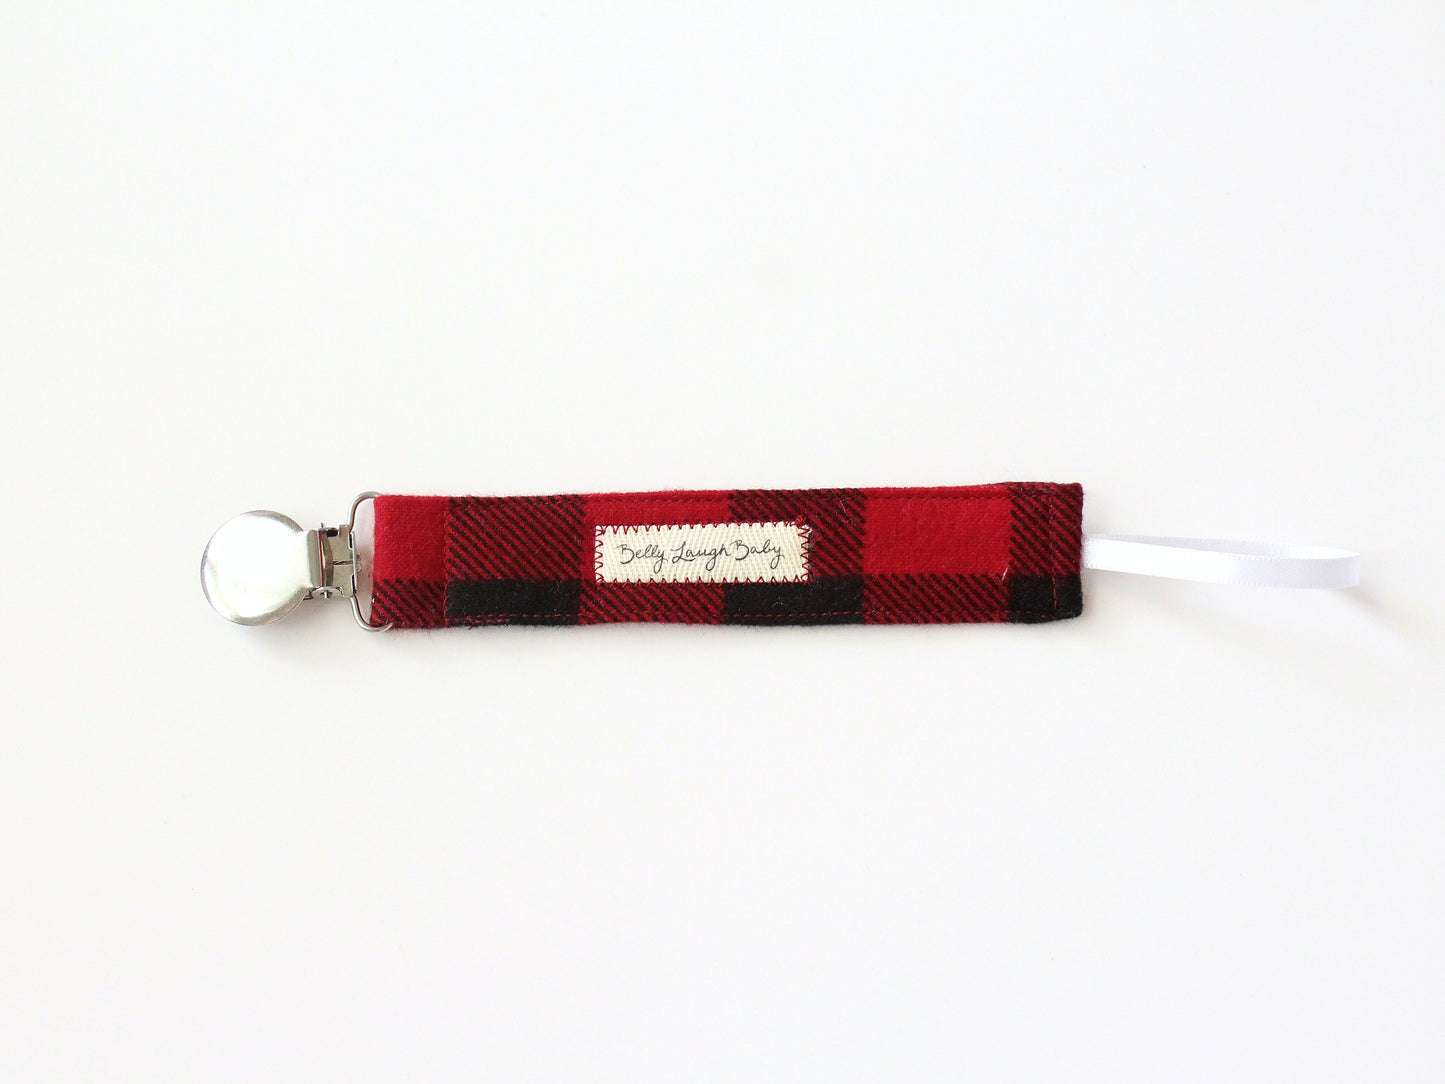 Red Buffalo Check Fabric Pacifier Clip | Gender Neutral Baby Gift | Soother Leash Binky Holder | CPSC Compliant